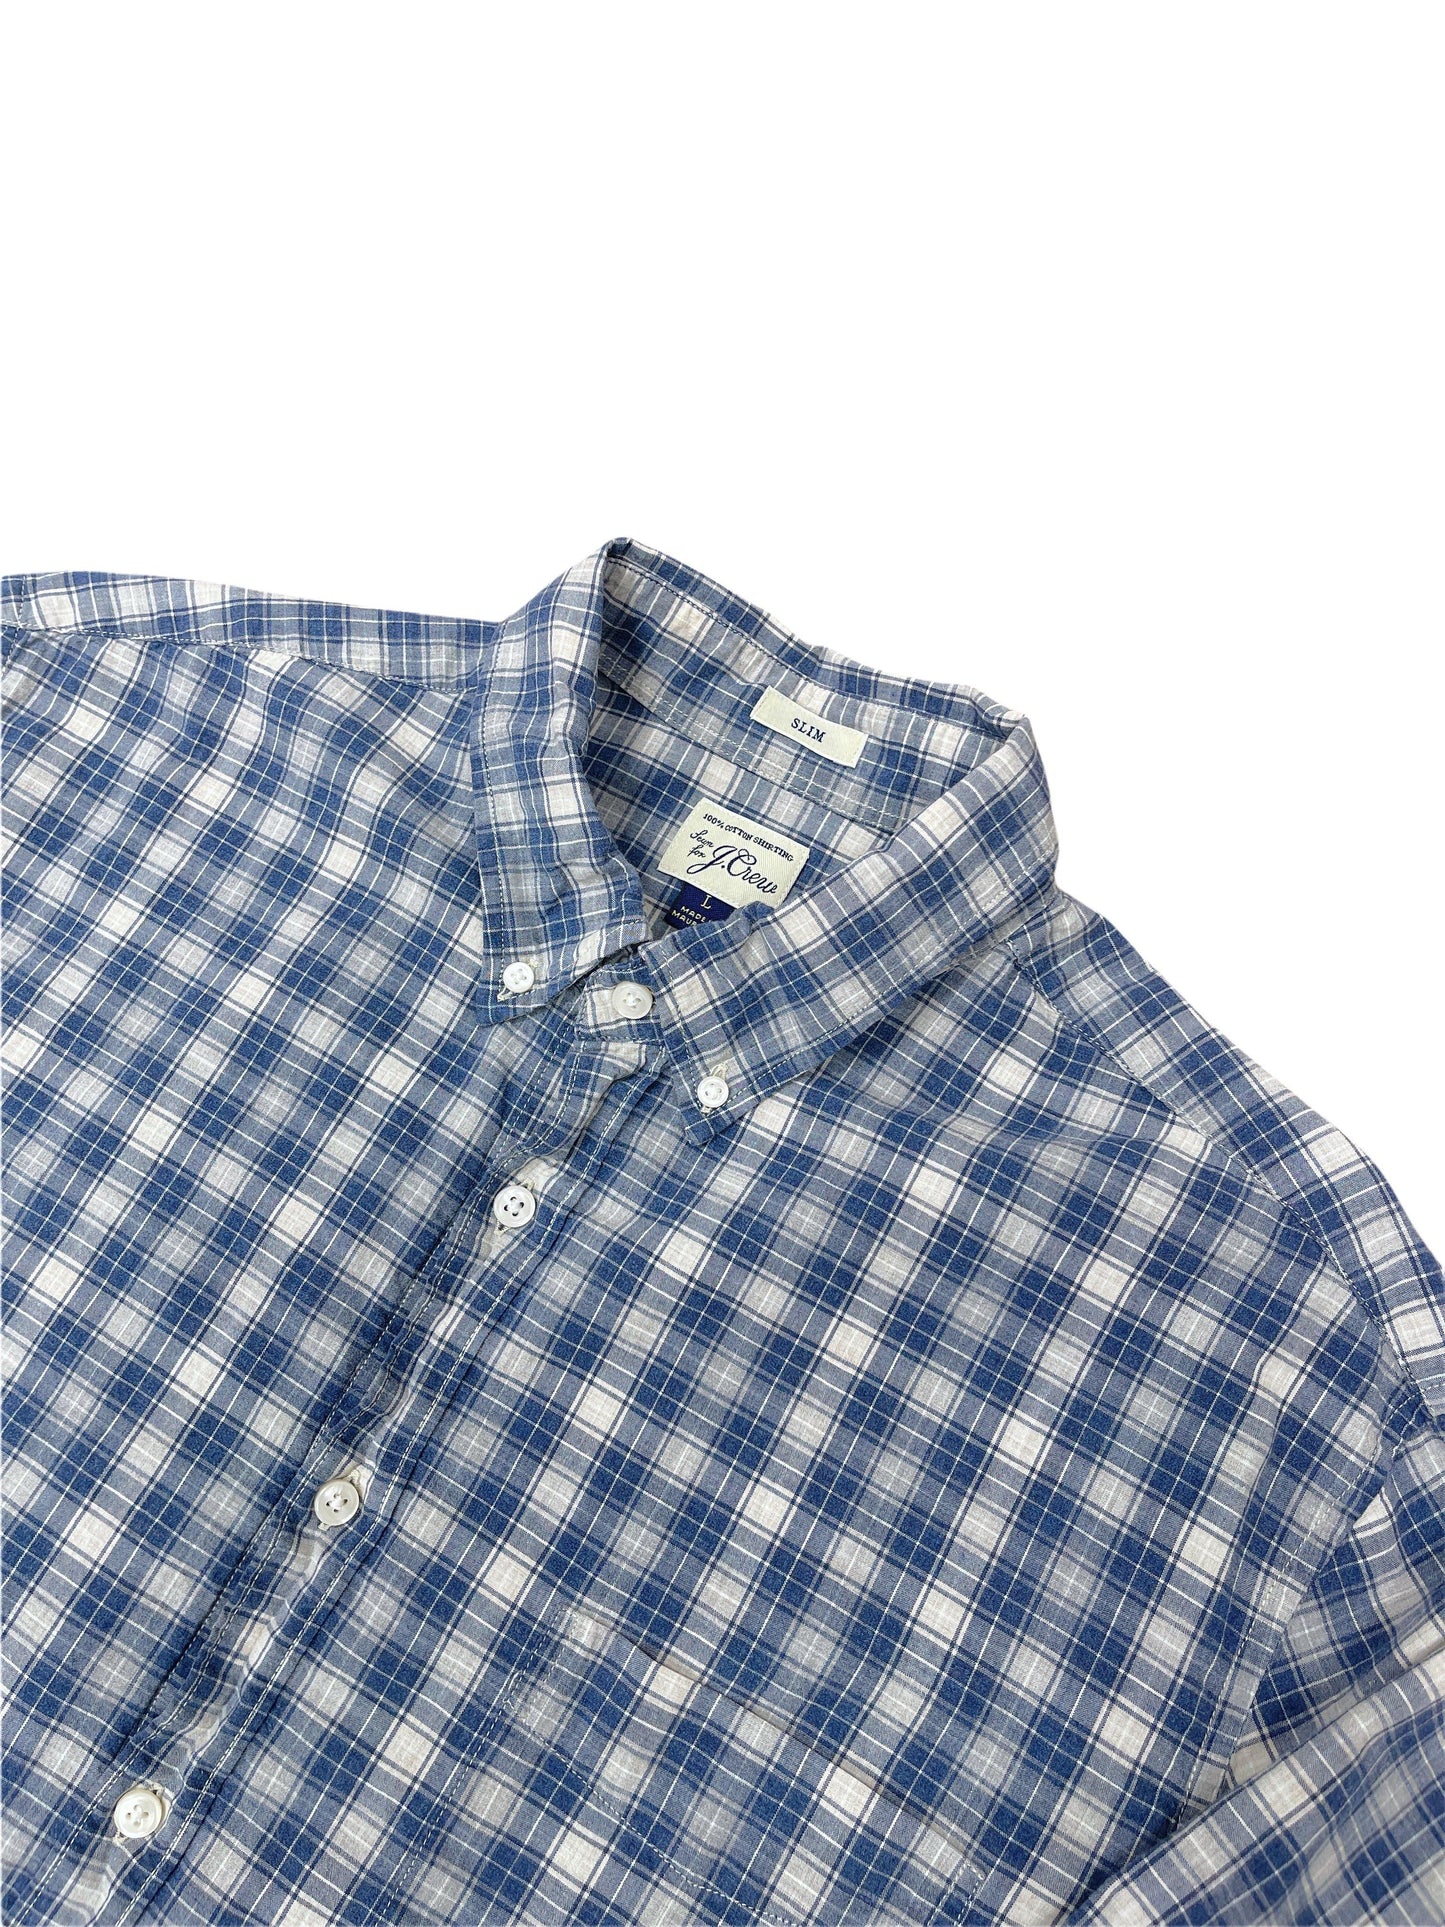 J. Crew Blue and Grey Plaid Button Down Shirt - Large Genuine Design luxury consignment